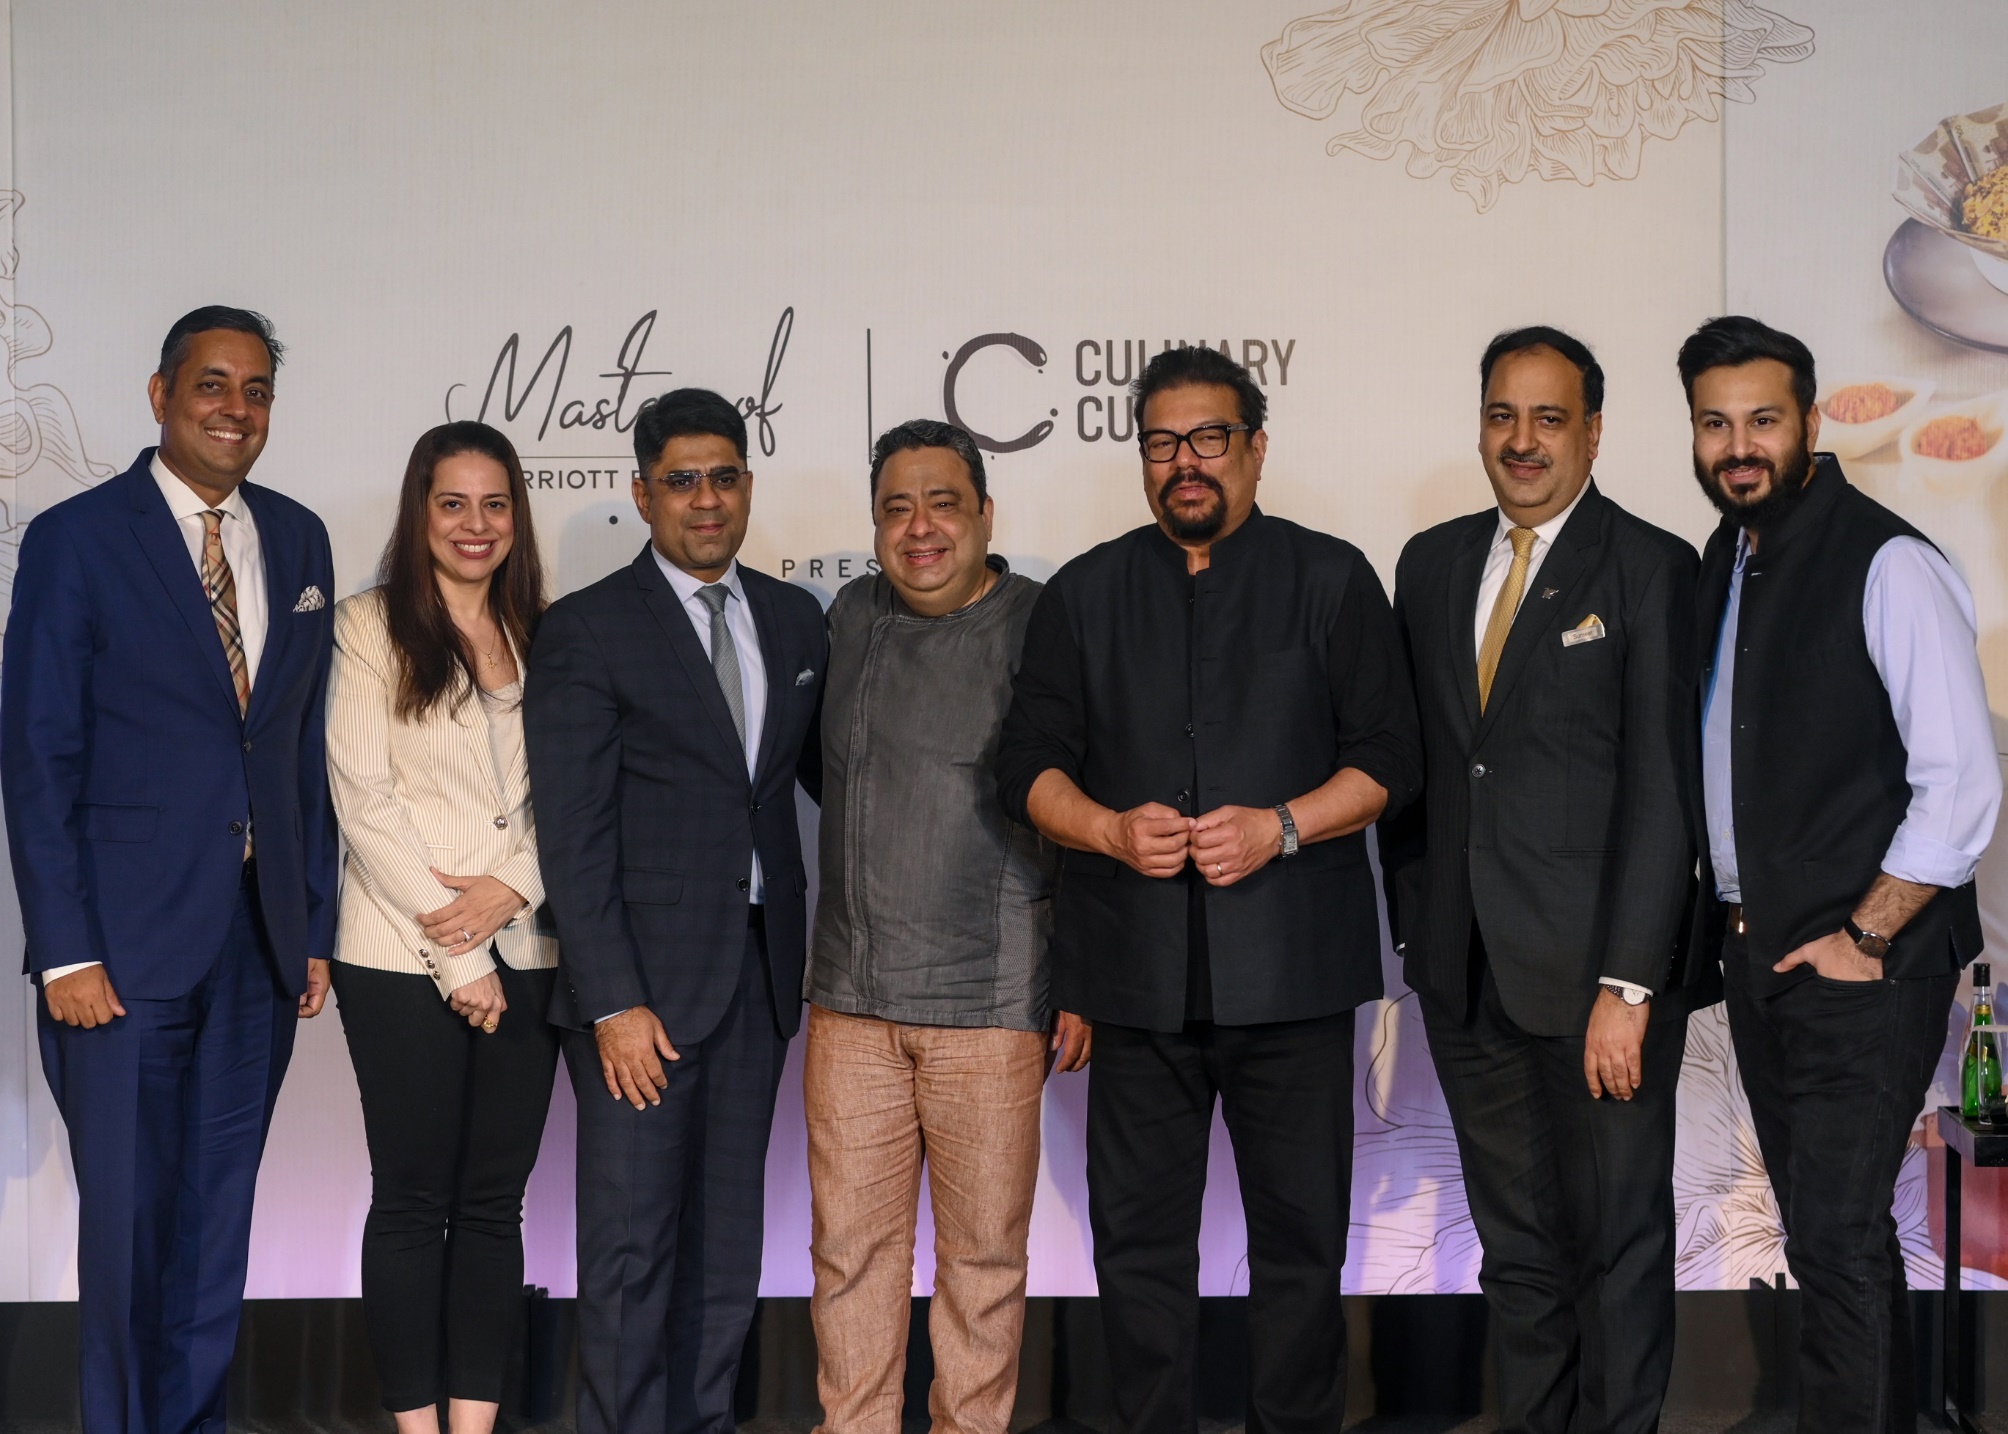 Masters of Marriott Bonvoy and Culinary Culture brings celebrity chef Manish Mehrotra to the Kolkata